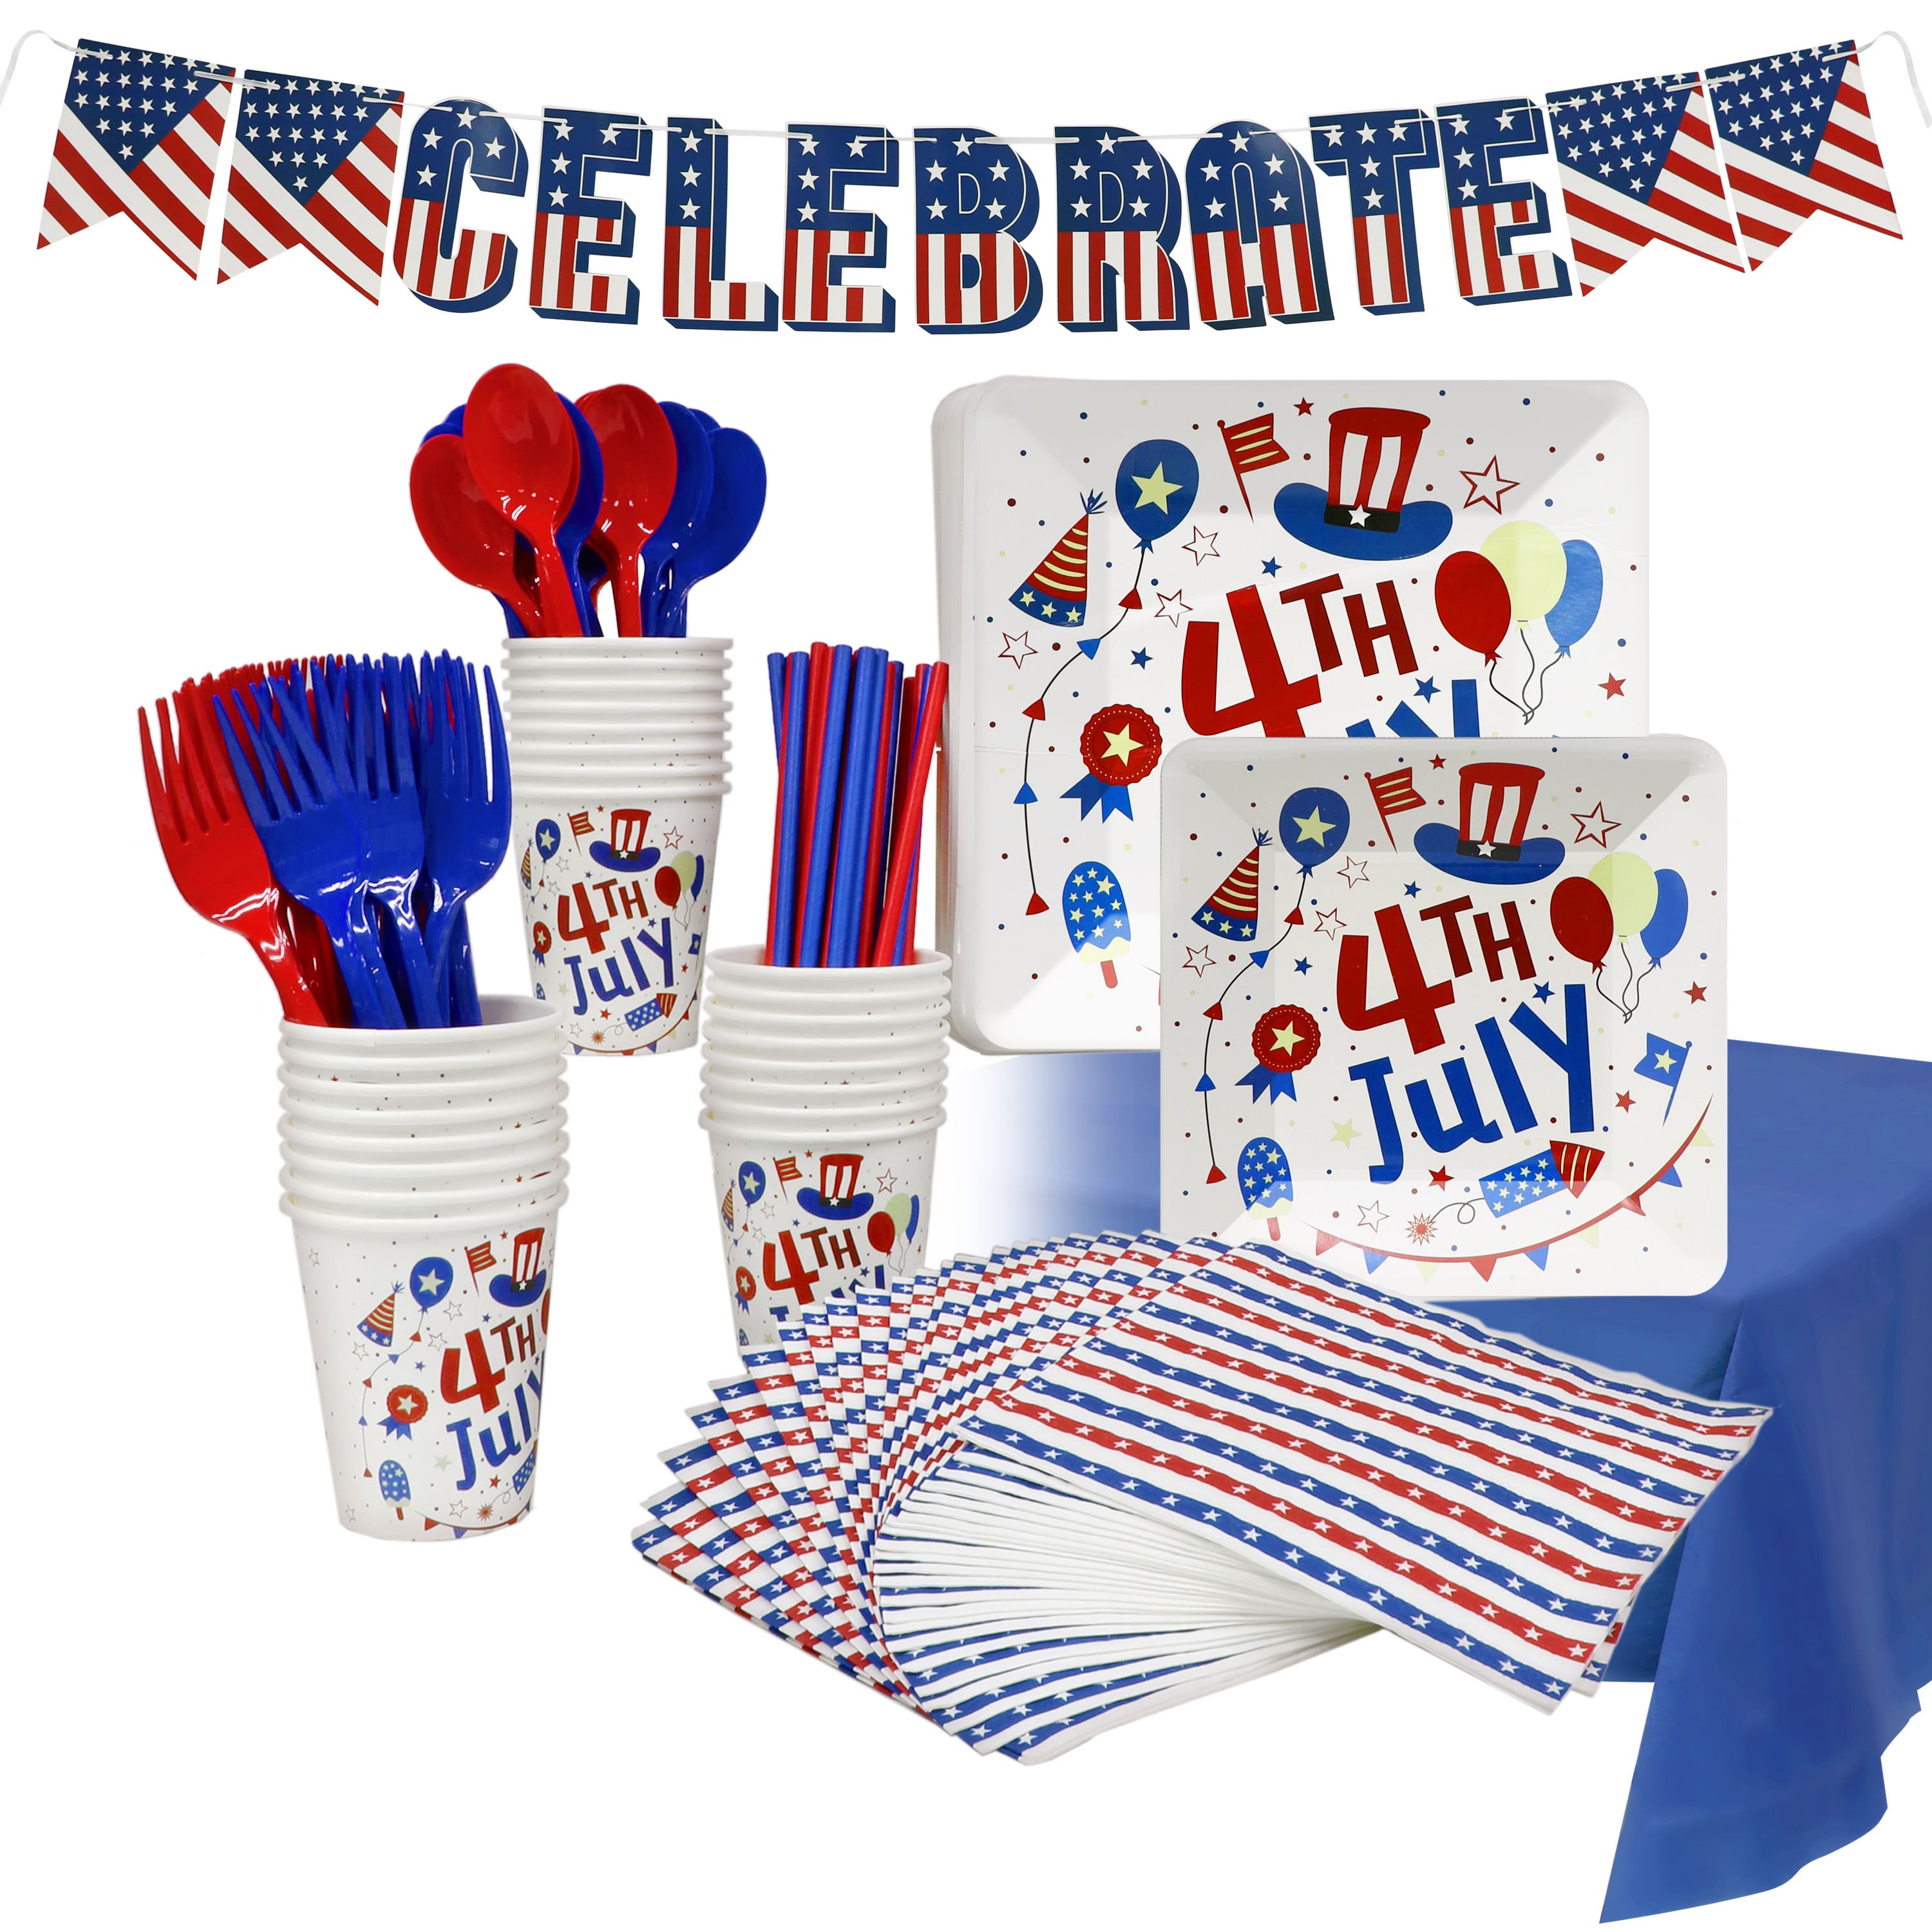 NICROLANDEE Patriotic Decorations - 8 Rolls Red White Blue Crepe Paper  Streamers Tassels Streamer Paper for 4th of July Decorations Independence  Day Memorial Day American Theme Party Decorations - Yahoo Shopping